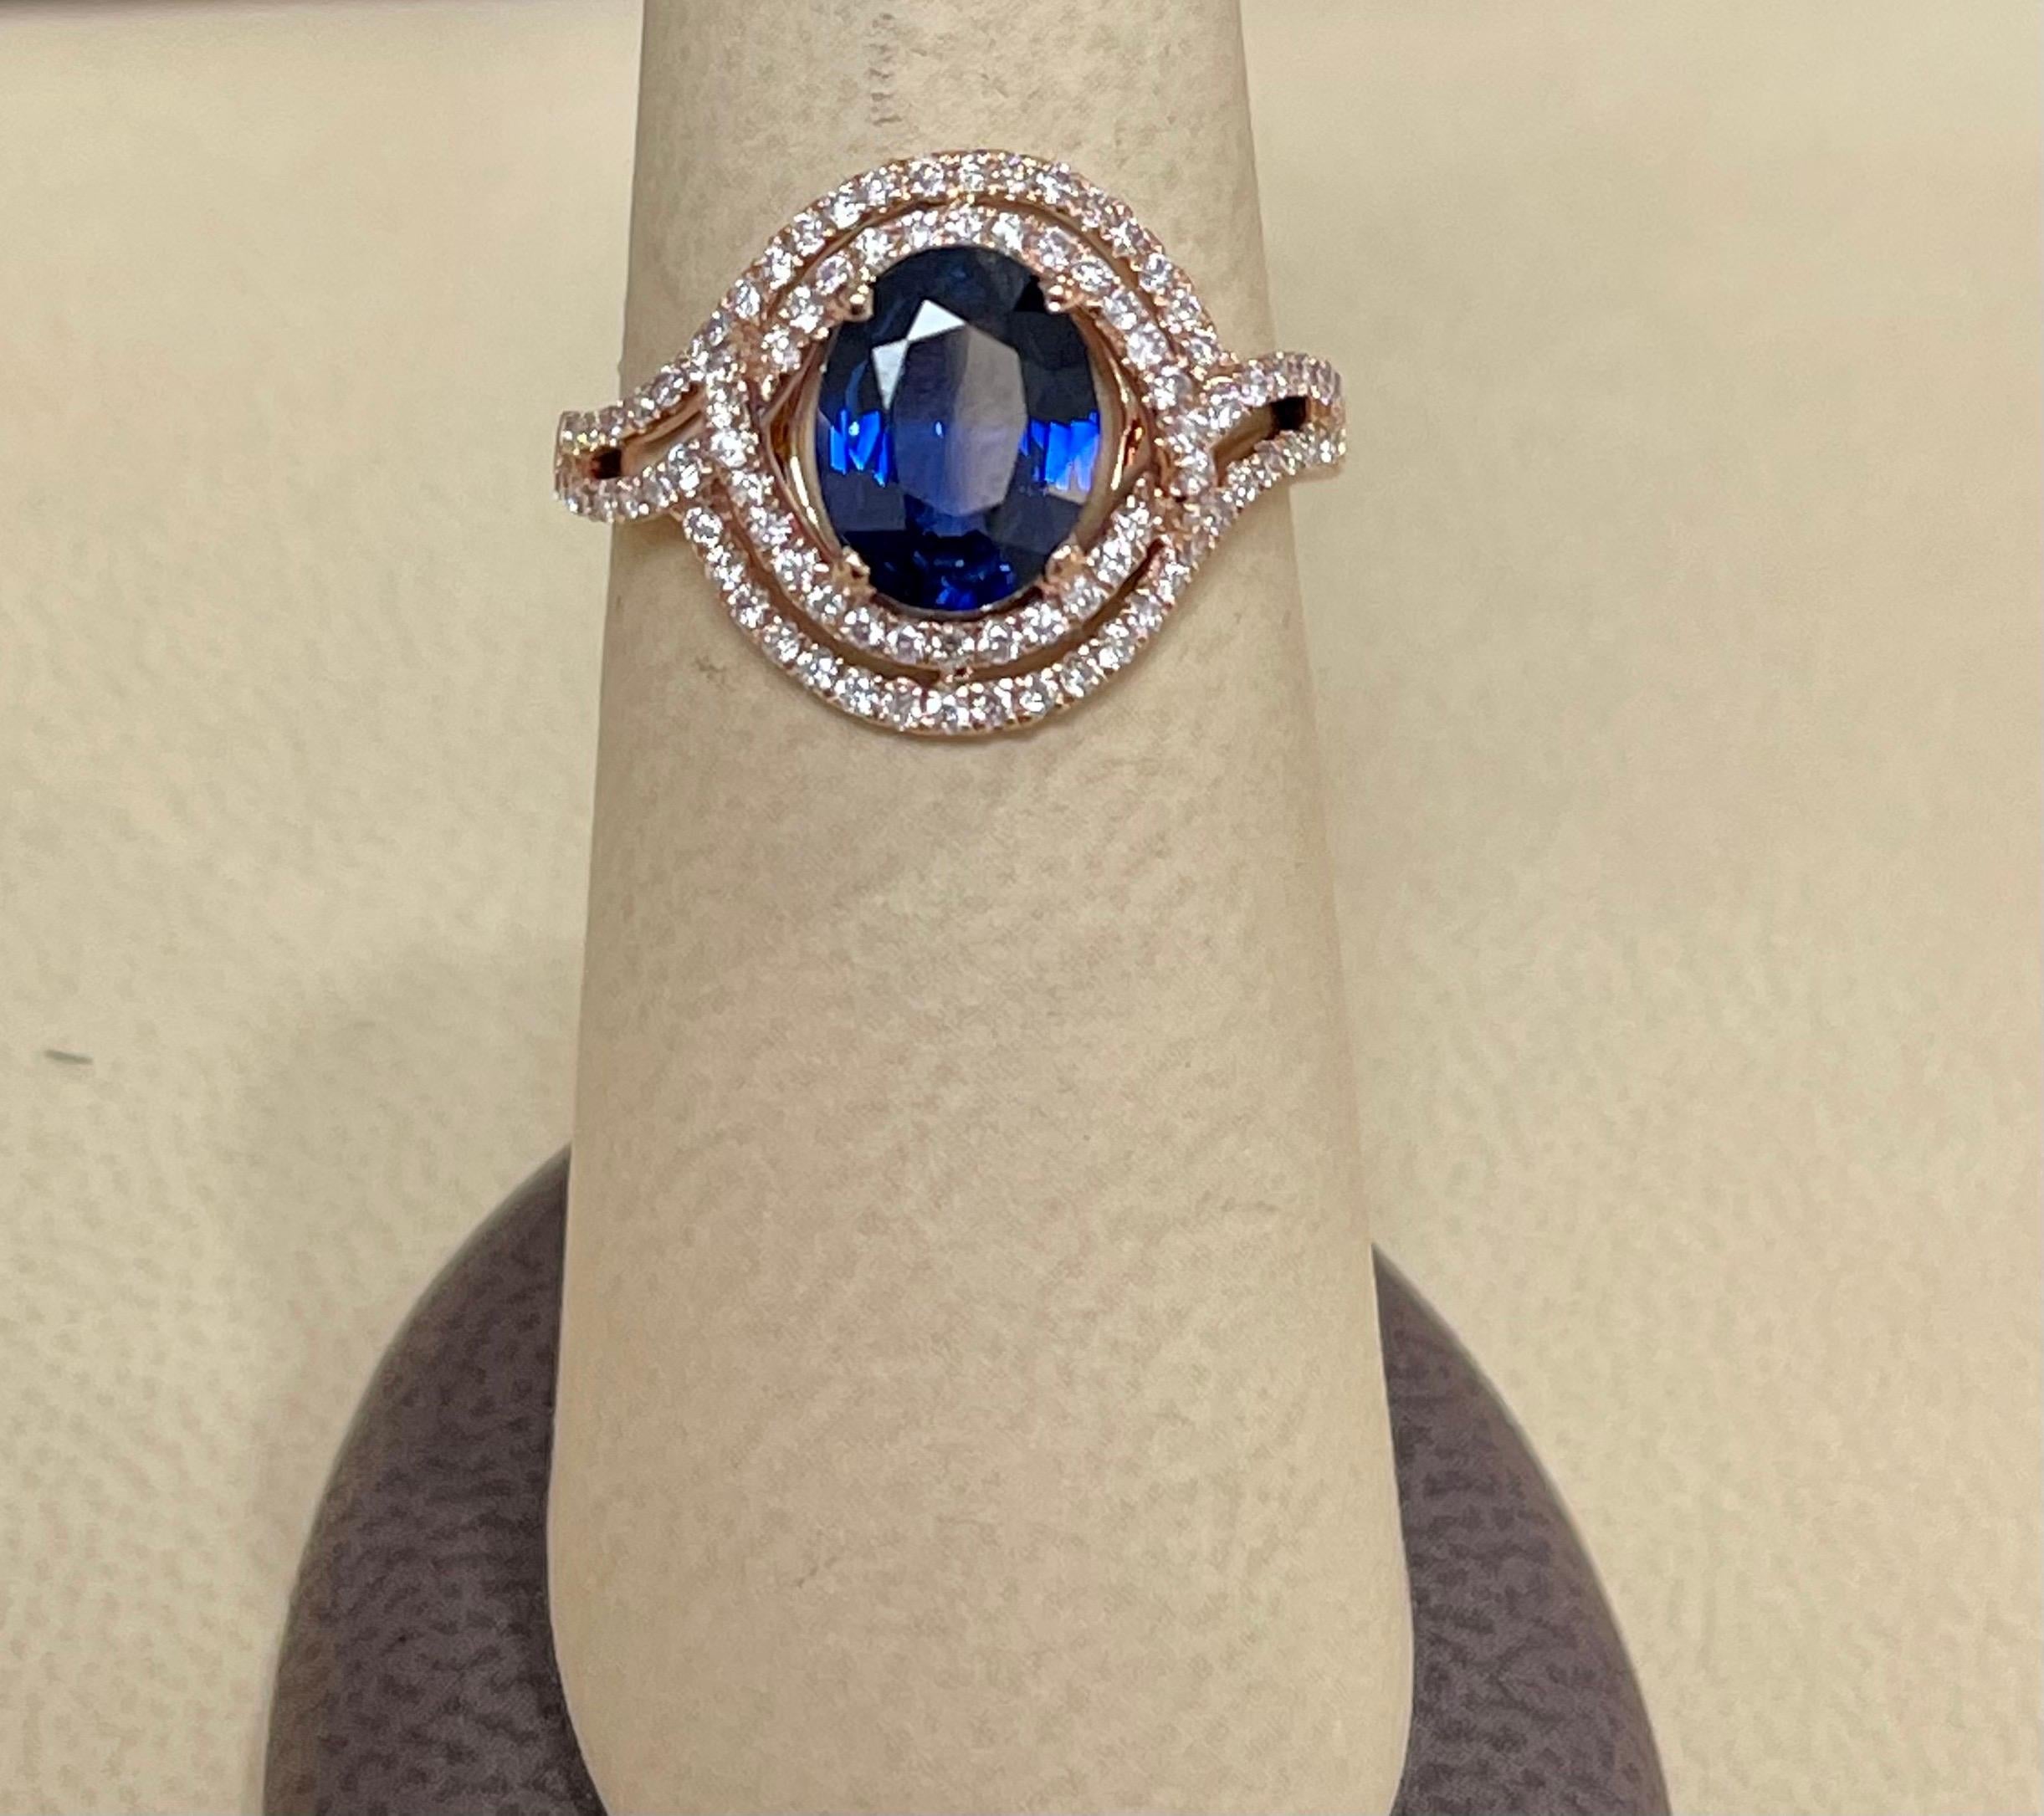 Designer Effy's 1.9Ct Blue Sapphire & 0.45 Ct Diamond Cocktail Ring in 14 Karat Rose Gold
Round Brilliant cut diamond 92 piece 0.5 pointer each
14 Karat yellow Gold 3.8 Grams
1.90 Ct Natural Diffused Ceylon Sapphire 
Ring Size 7  ( it can be resized